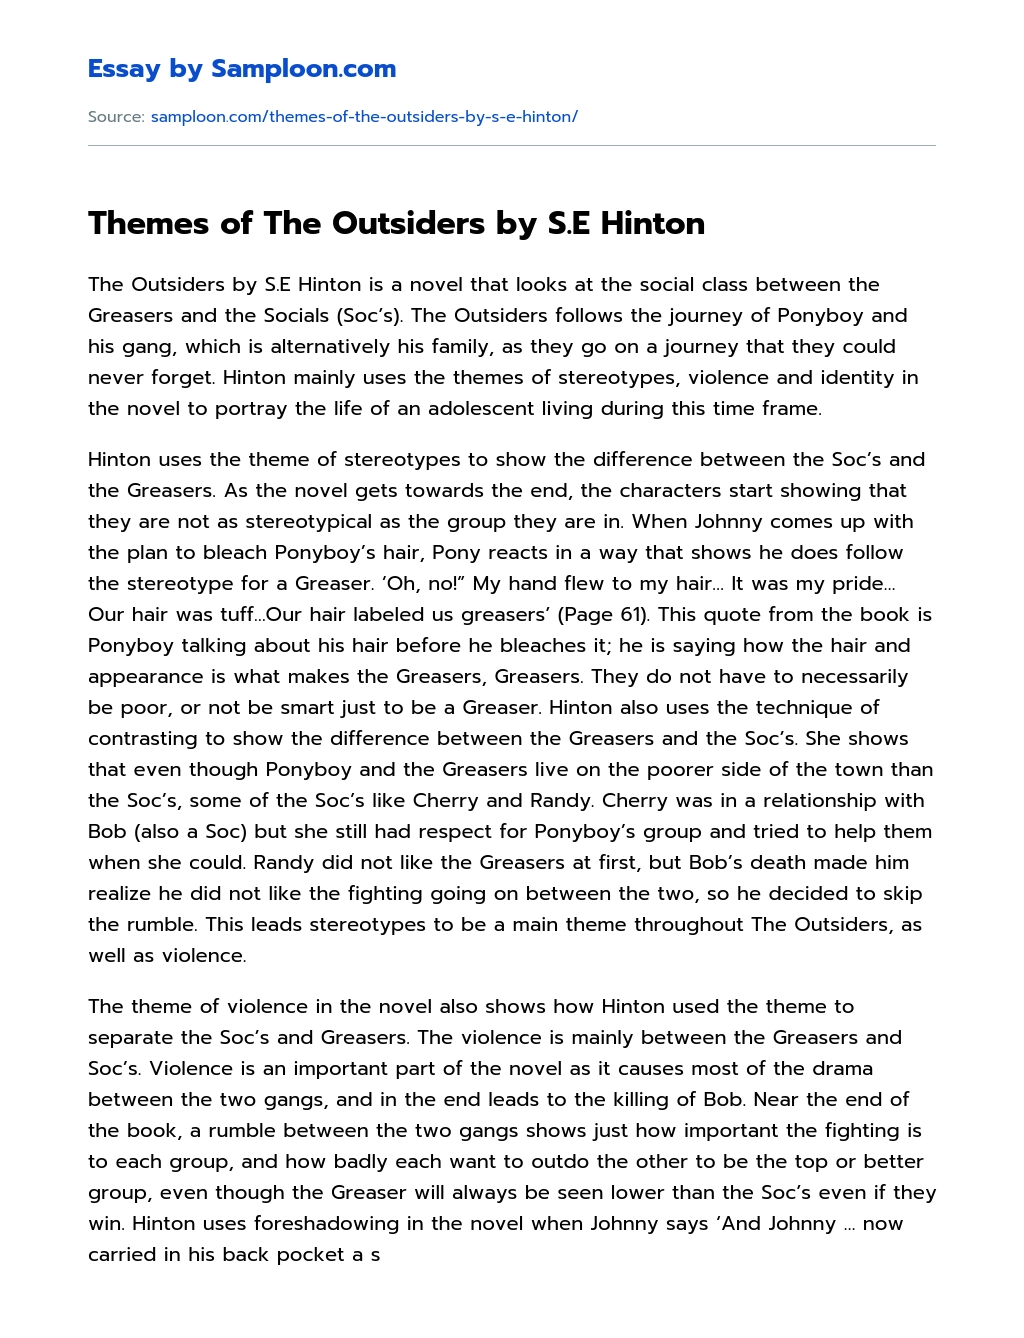 Themes of The Outsiders by S.E Hinton Reflective Essay essay